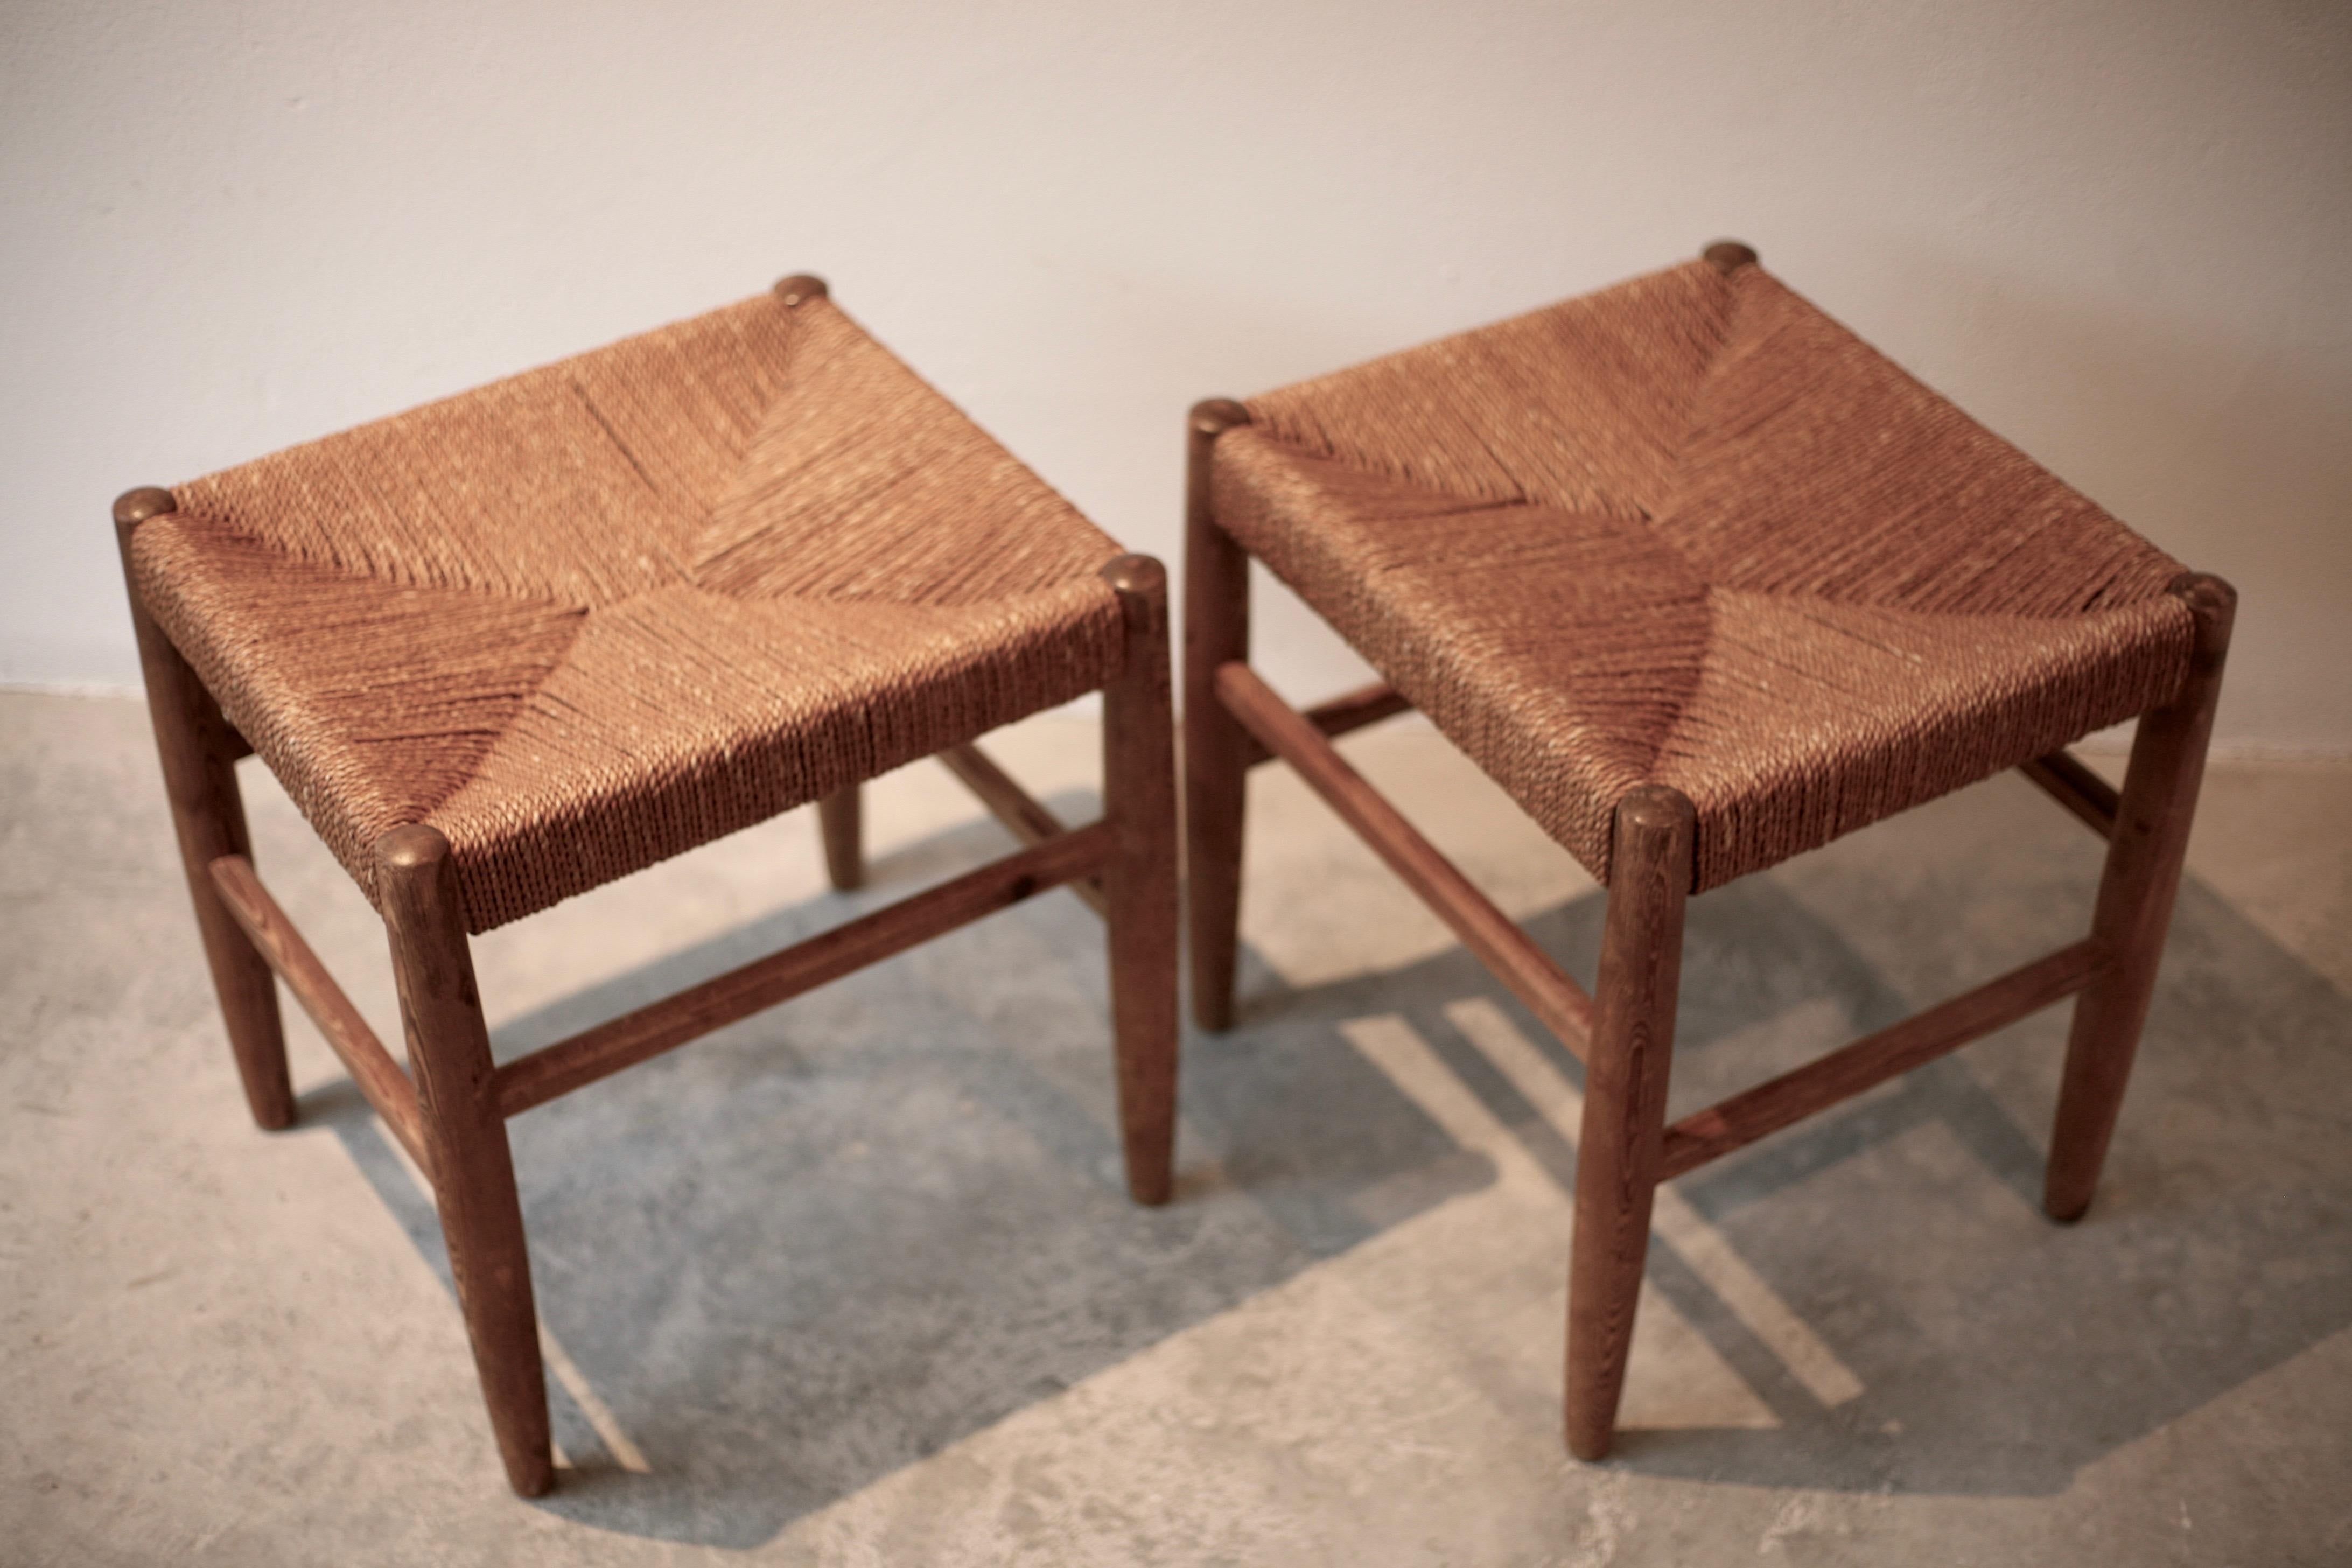 Pair of Swedish pine stools made by Gemla with rush seats of spun papercord. Made in the manner of Gunnar Asplund’s chairs manufactured by the same factory.